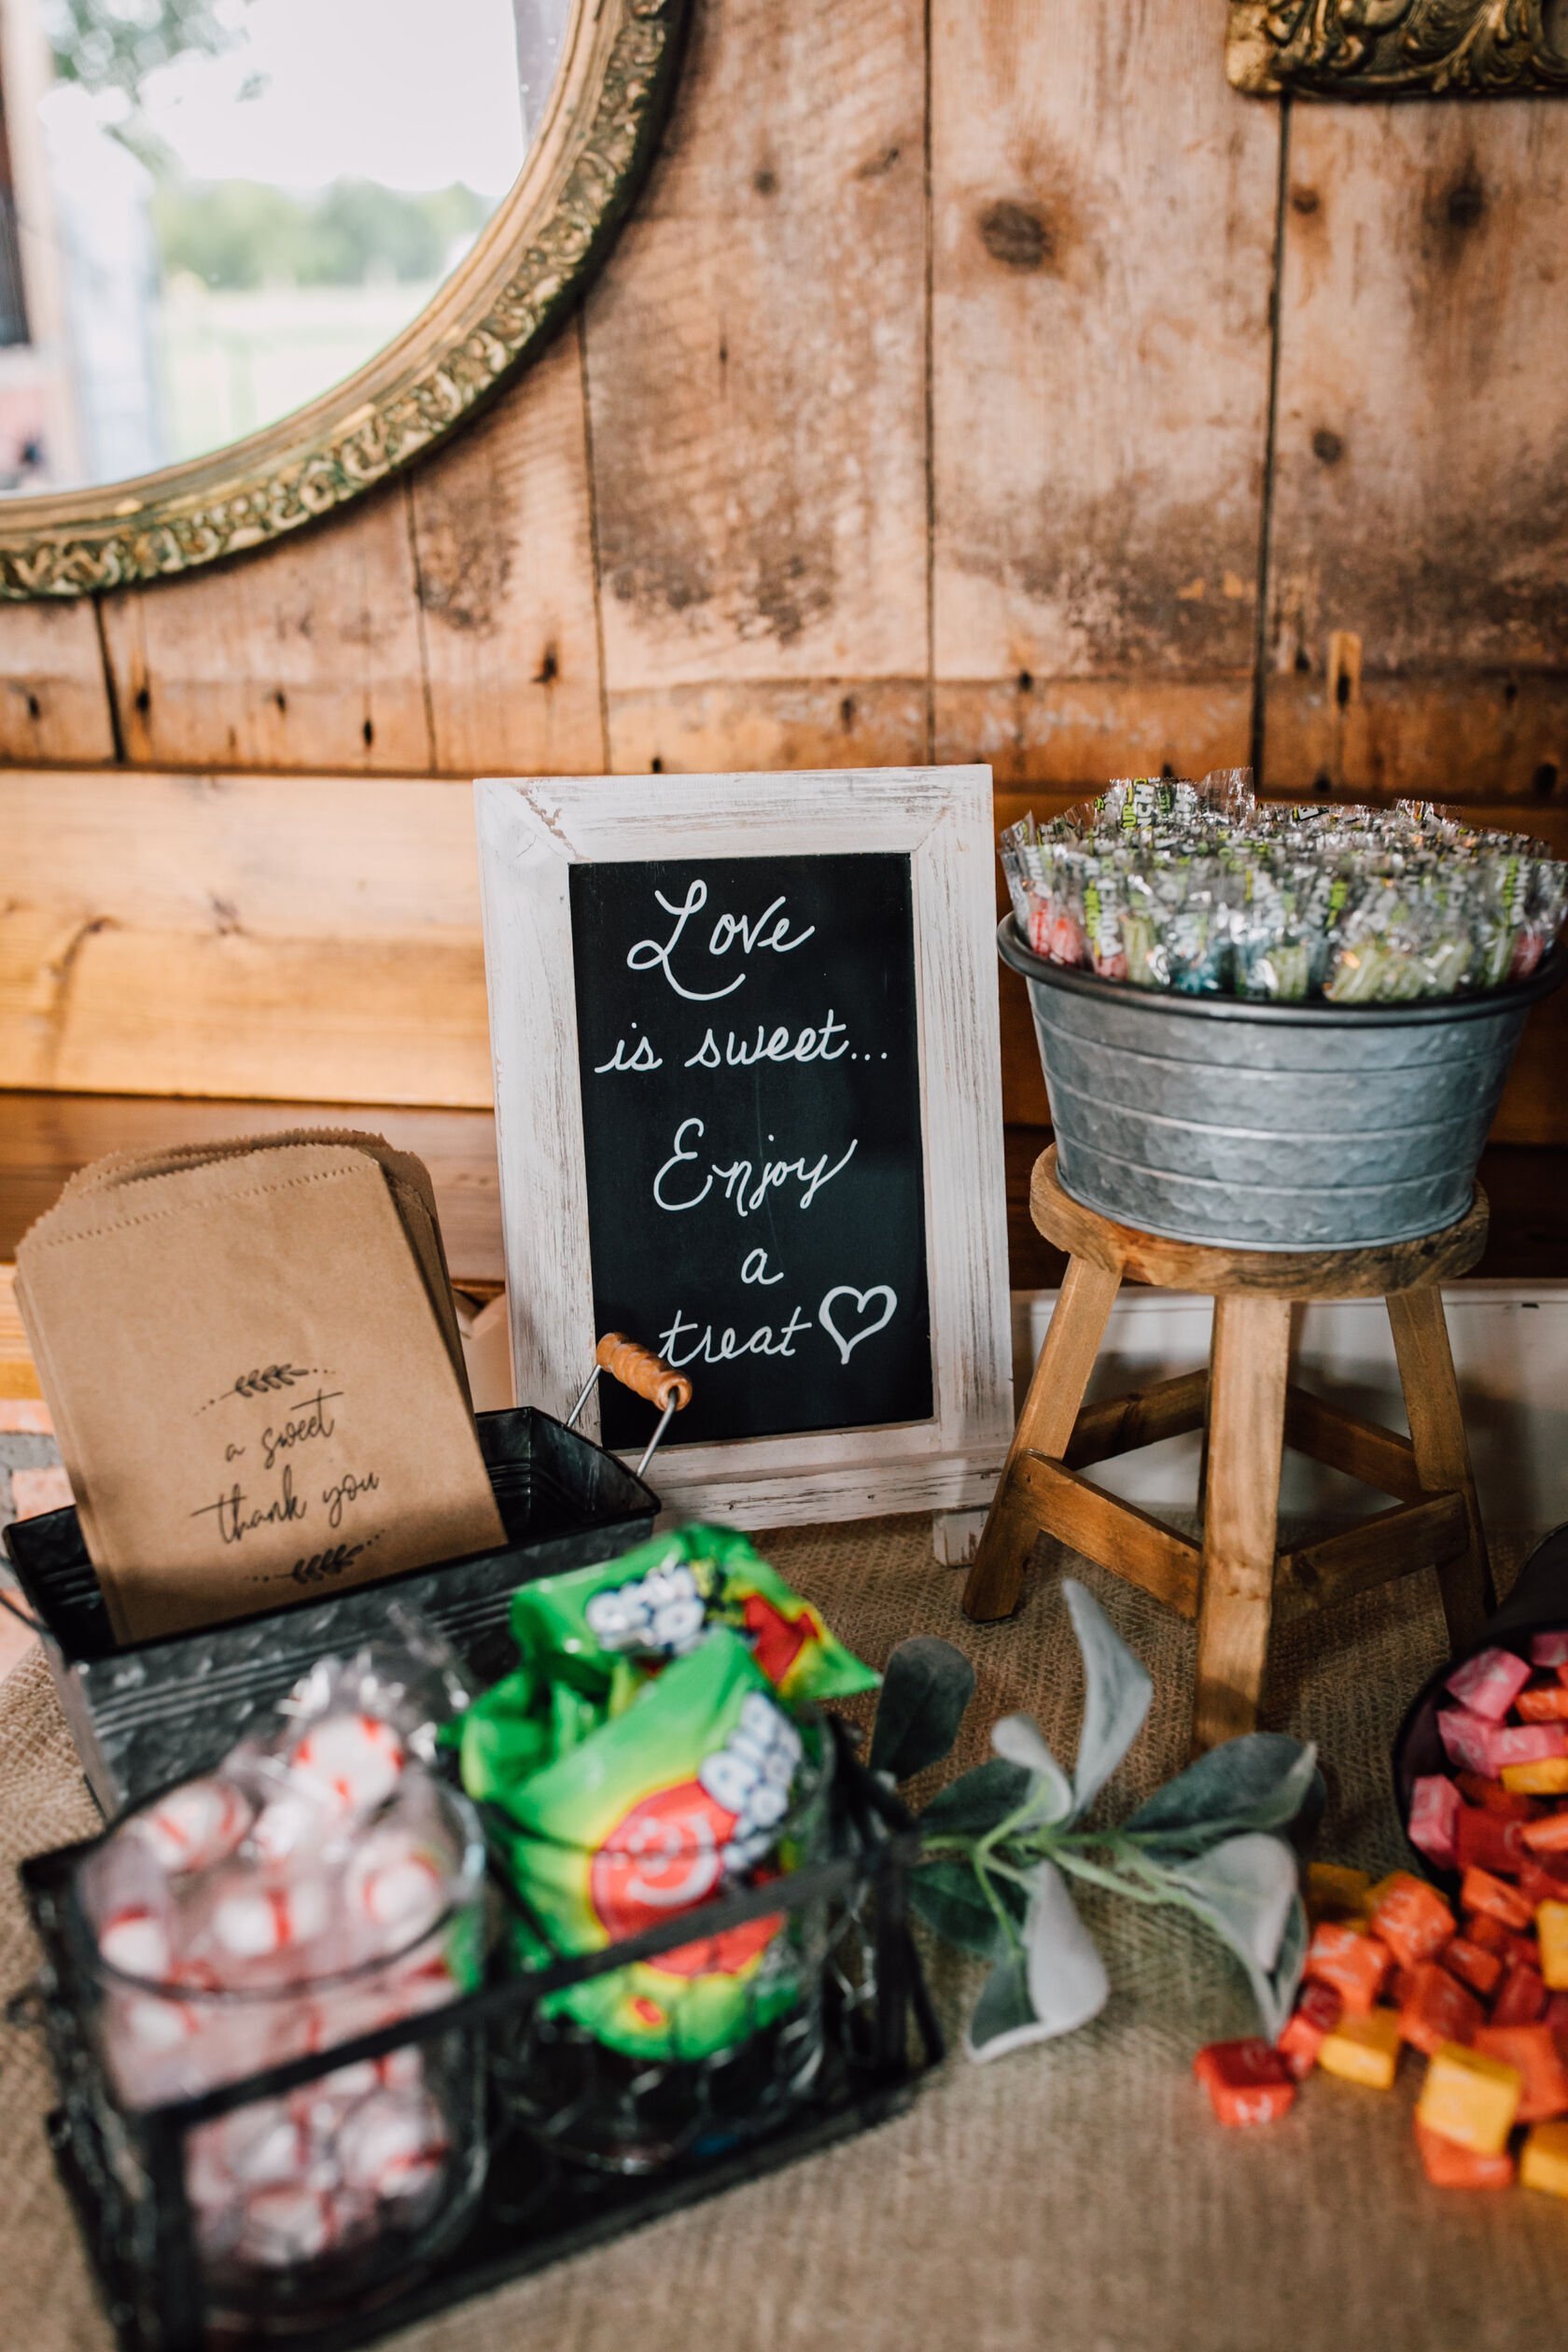  A sign for the wedding candy buffet says “love is sweet… enjoy a treat” offering candy as favors for wedding guests 